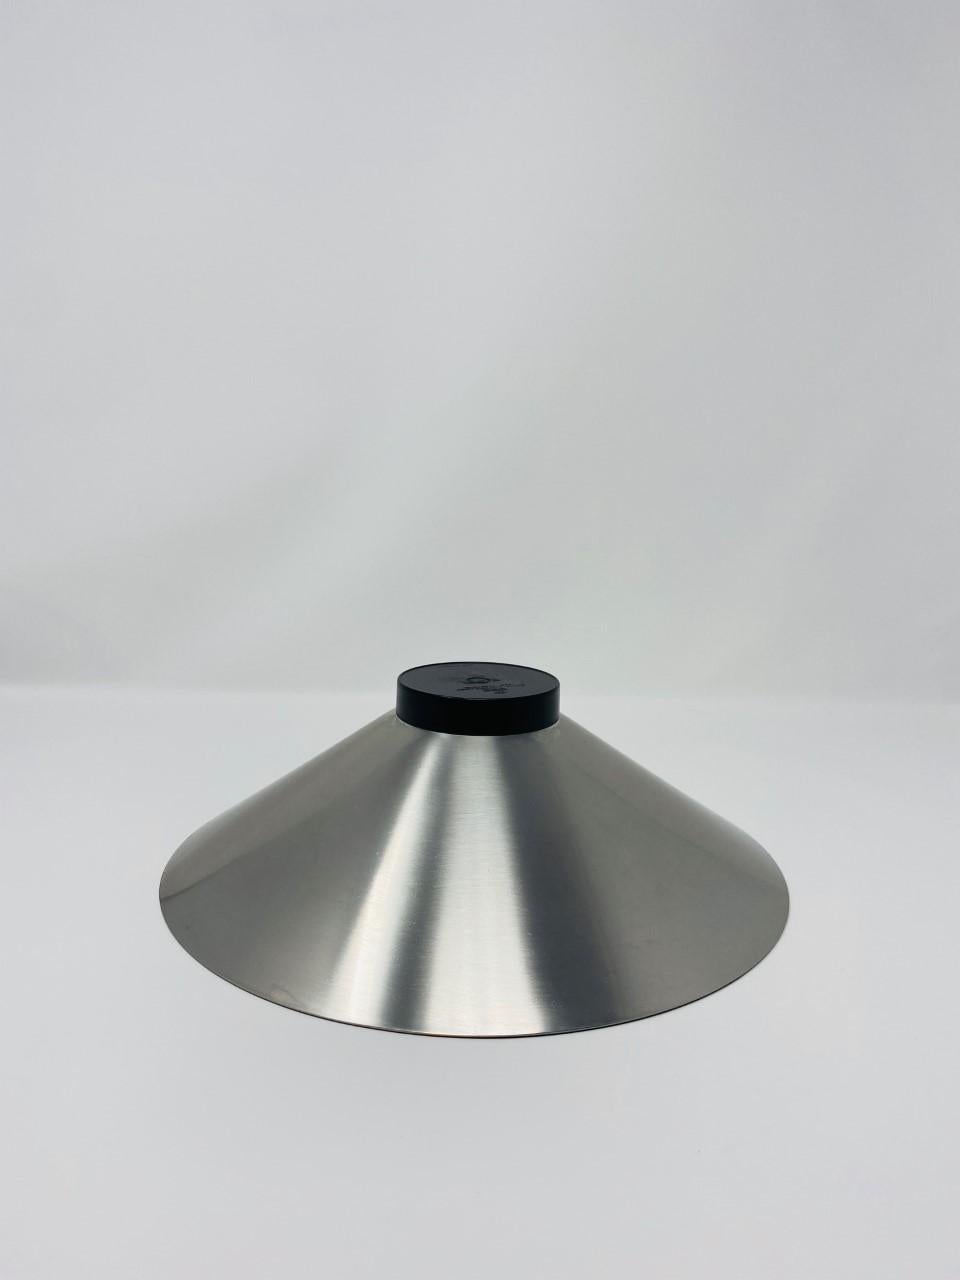 This vintage stainless steel bowl is simple yet graphic and a statement piece of design. The timeless simple, yet bold lines in brushed stainless steel envelop into a cone shape that rest on a black plastic base. Beautiful piece that will enhance